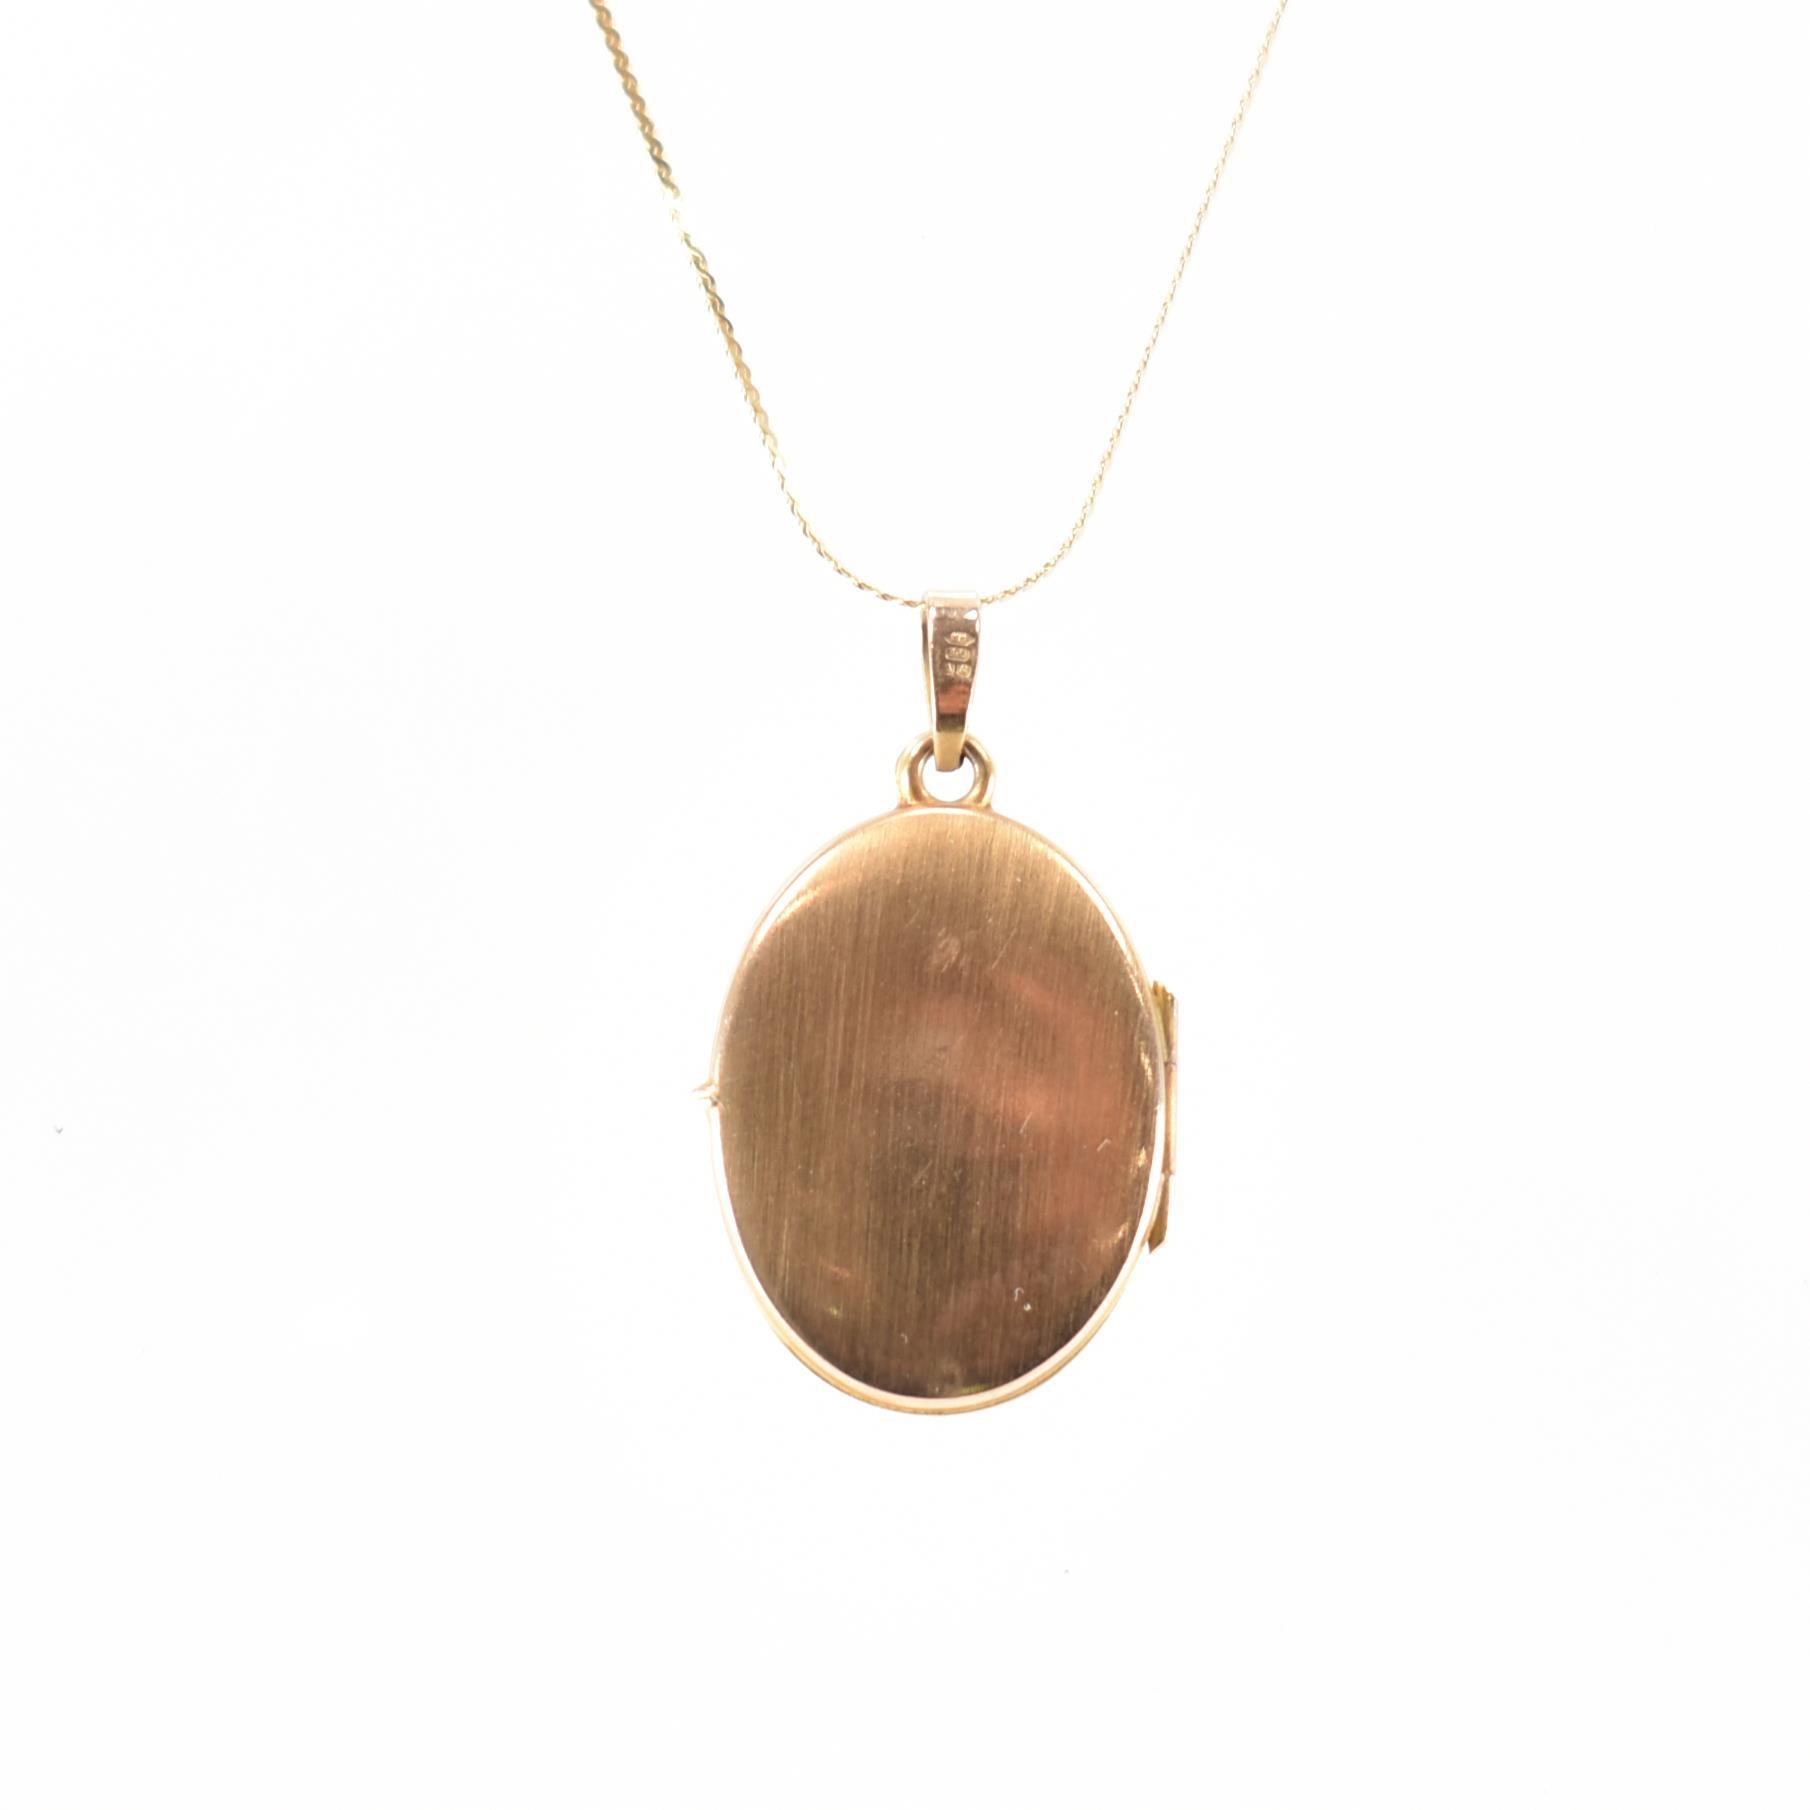 HALLMARKED 9CT GOLD LOCKET PENDANT & CHAIN NECKLACE - Image 2 of 3